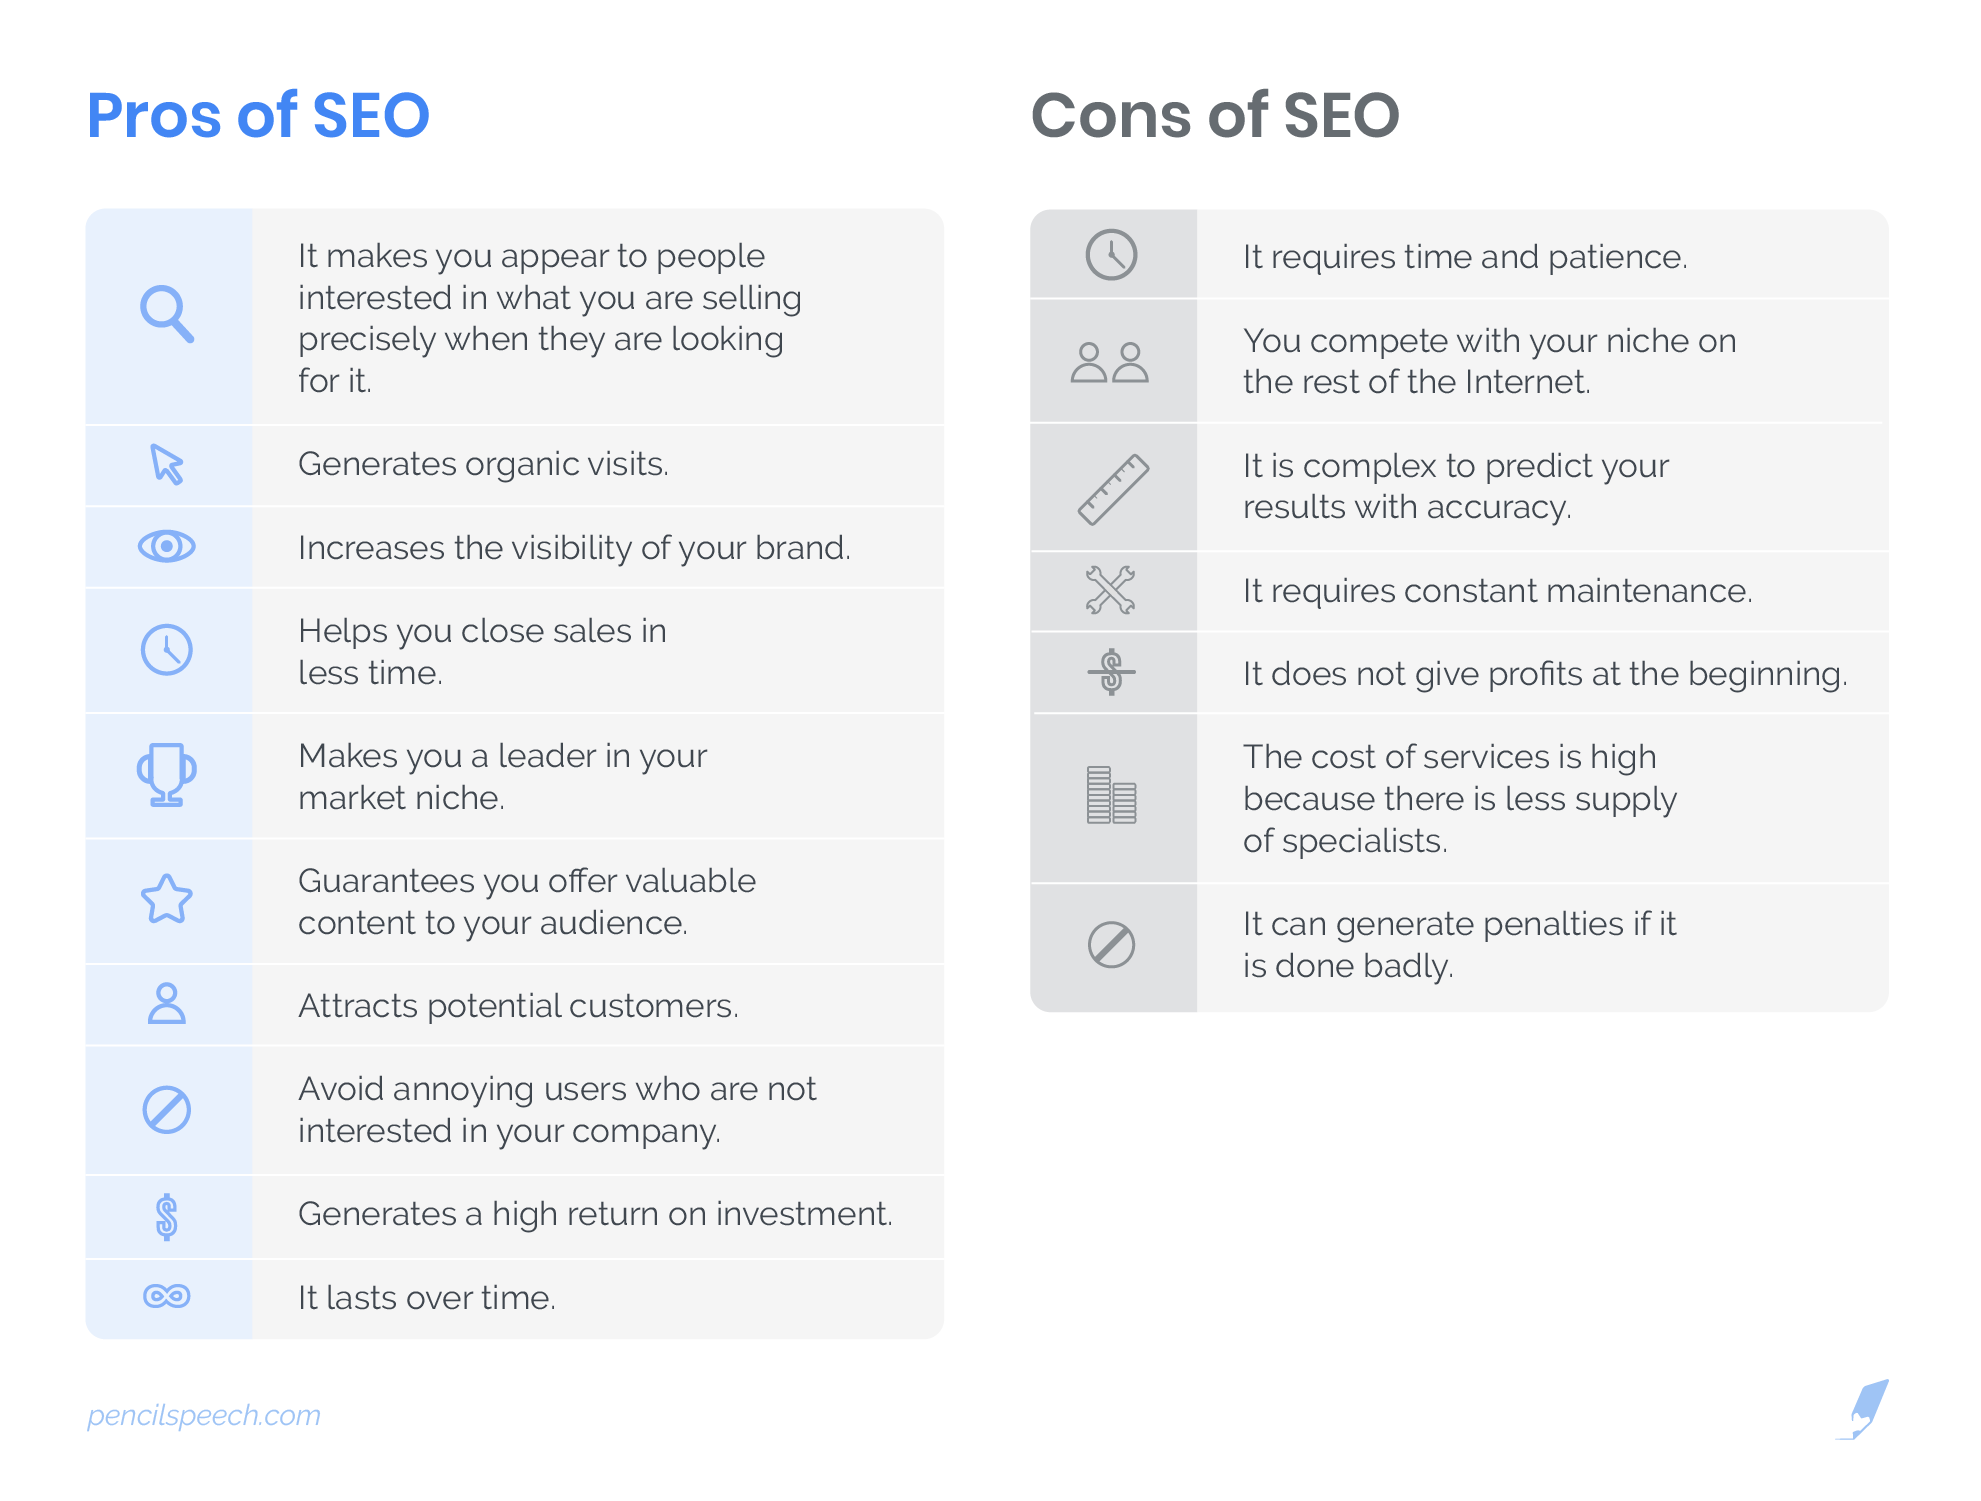 Pros and cons of SEO